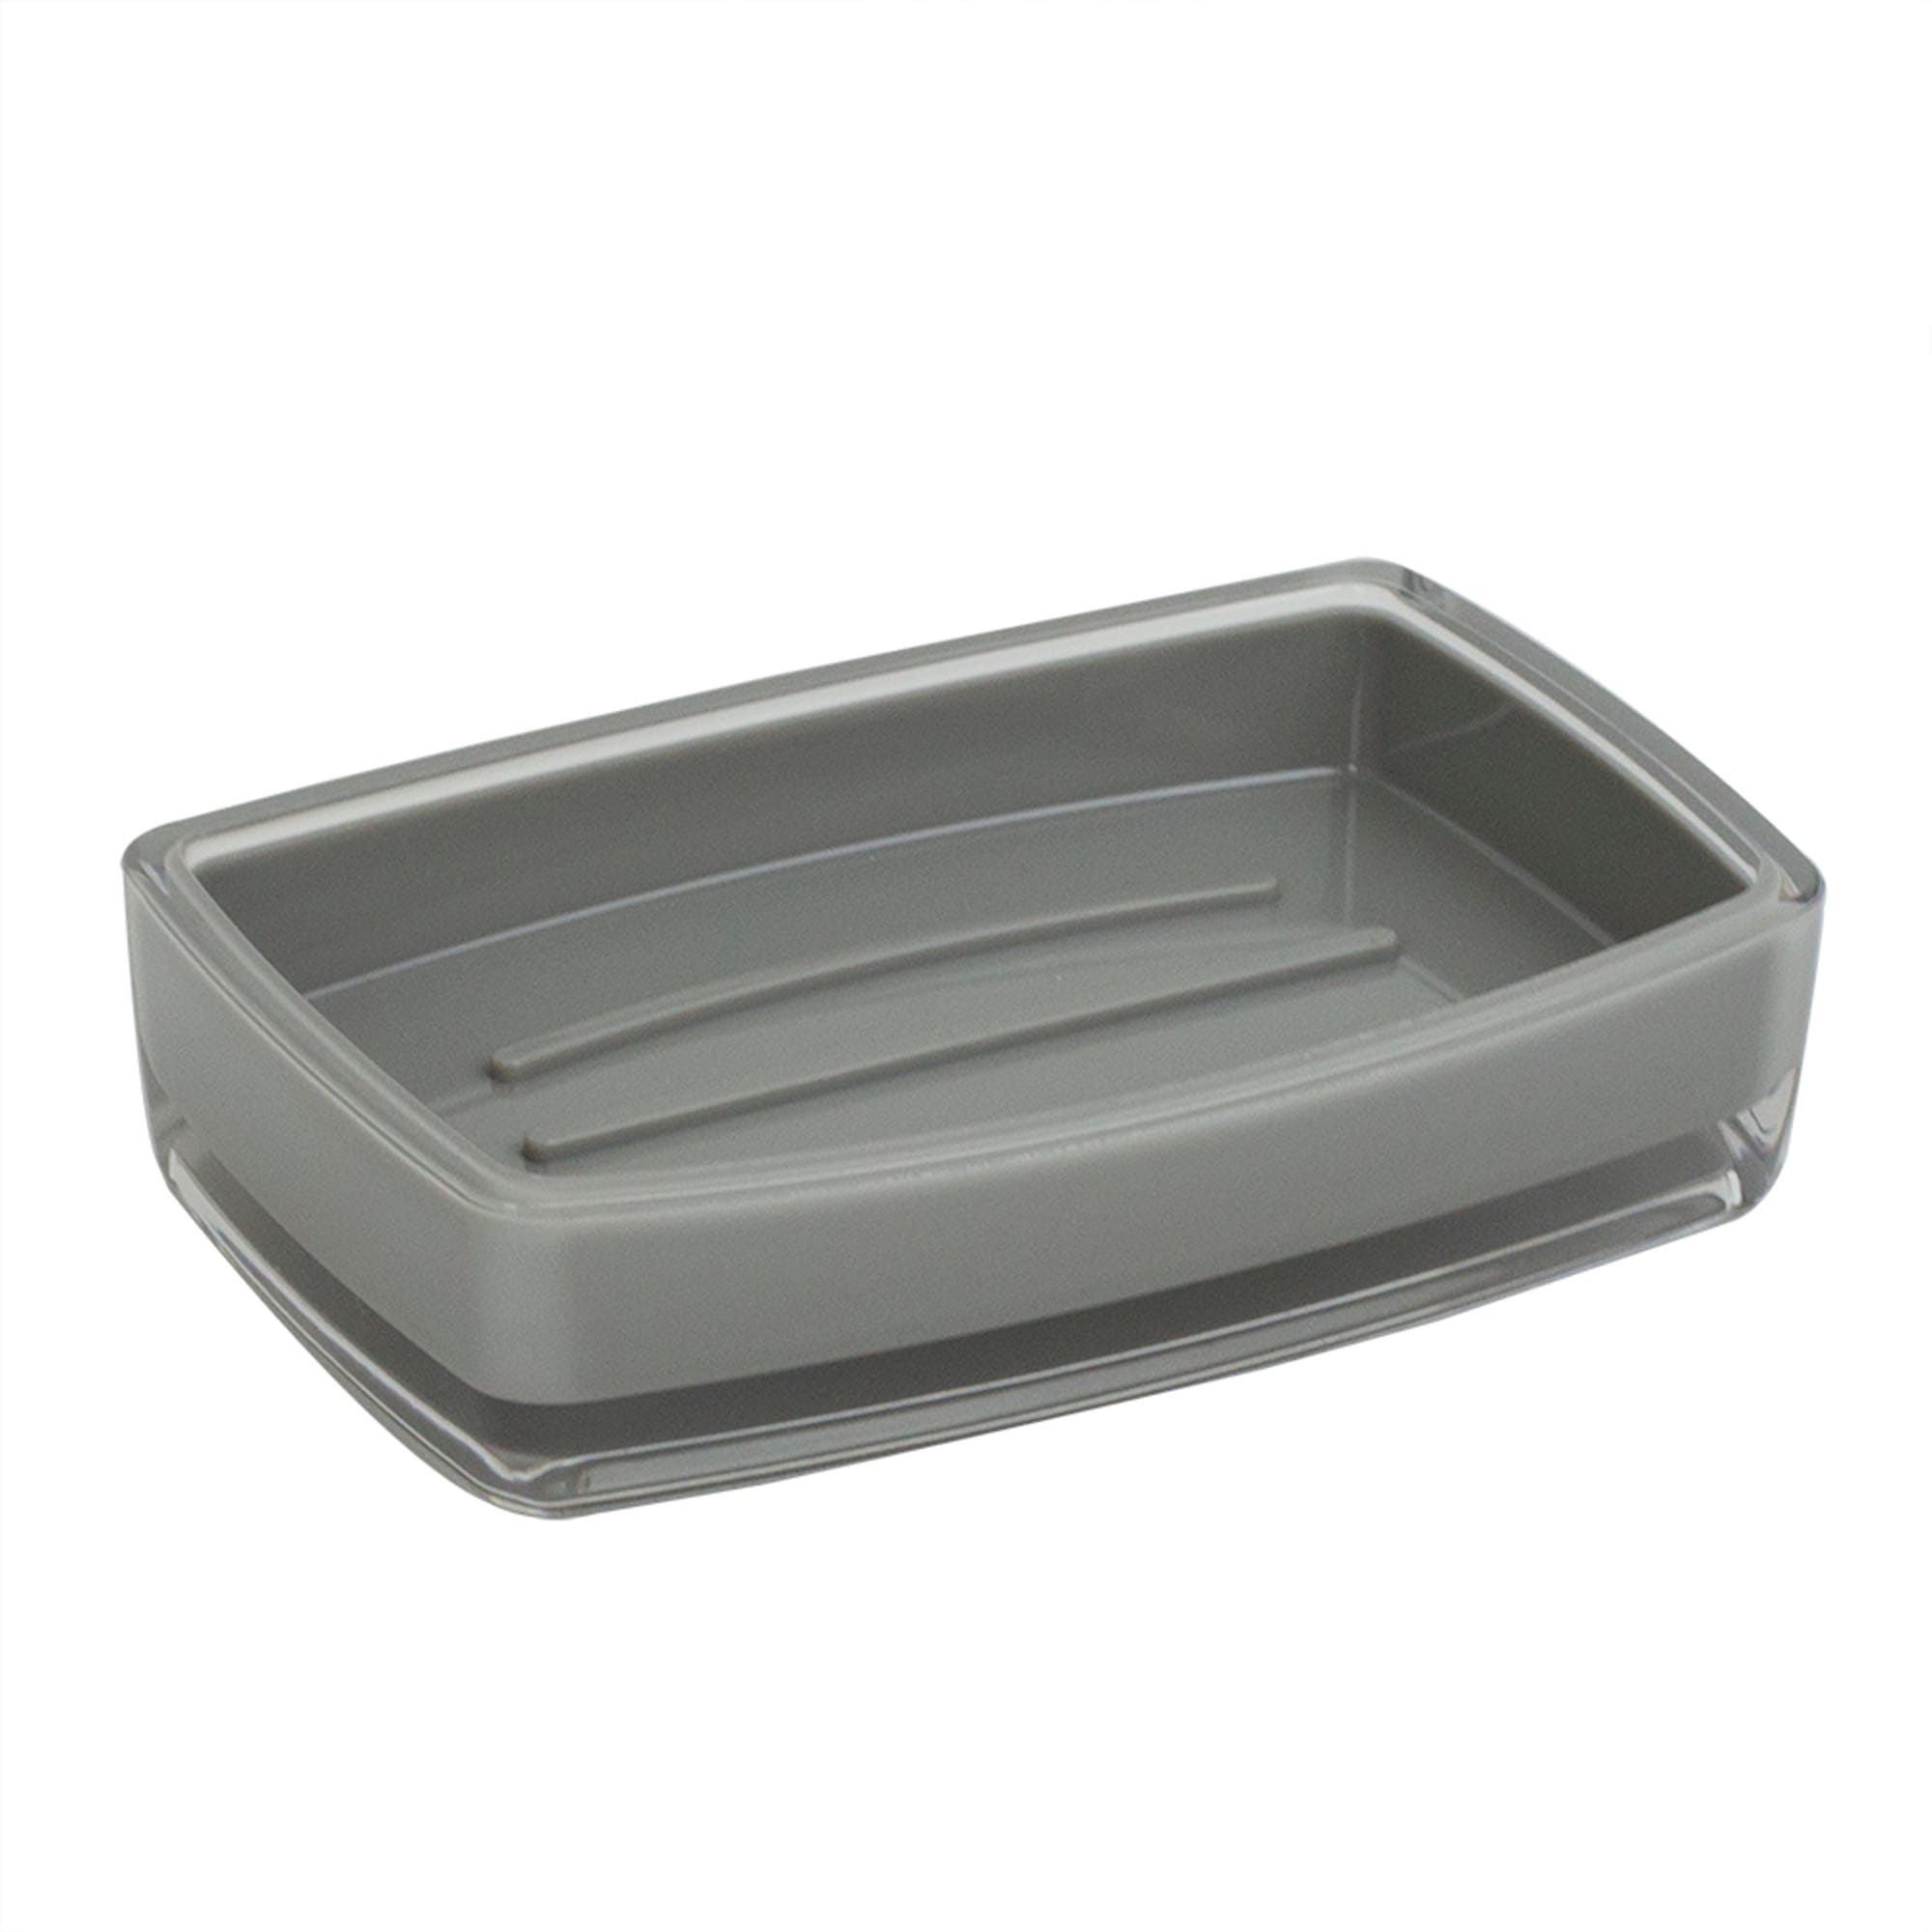 Home Basics Plastic Soap Dish, Grey $3.00 EACH, CASE PACK OF 24